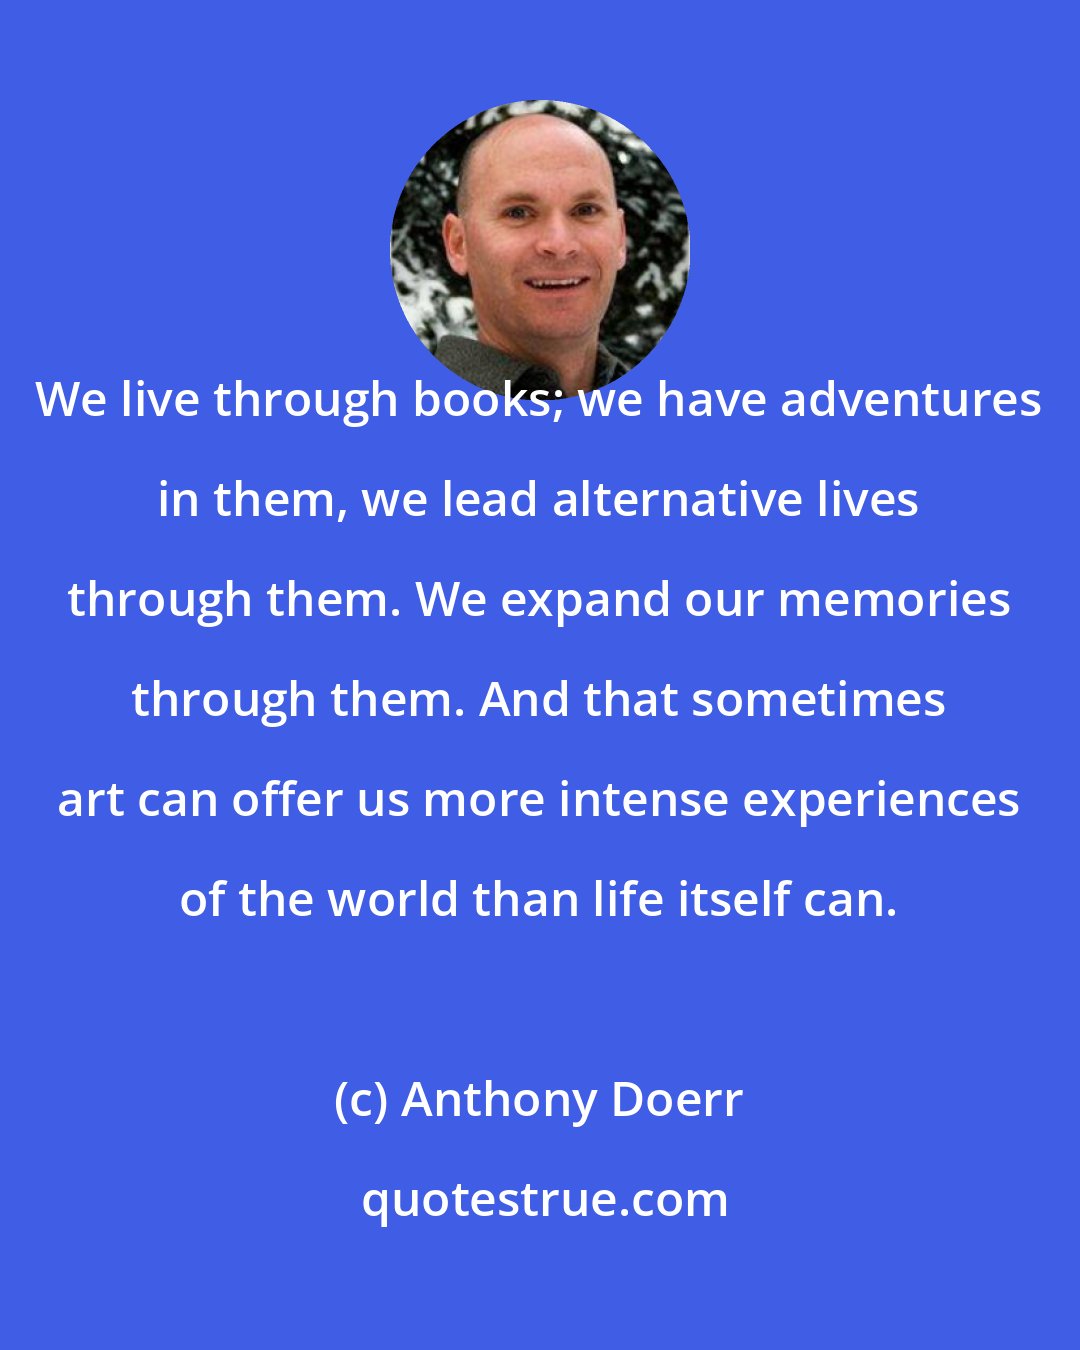 Anthony Doerr: We live through books; we have adventures in them, we lead alternative lives through them. We expand our memories through them. And that sometimes art can offer us more intense experiences of the world than life itself can.